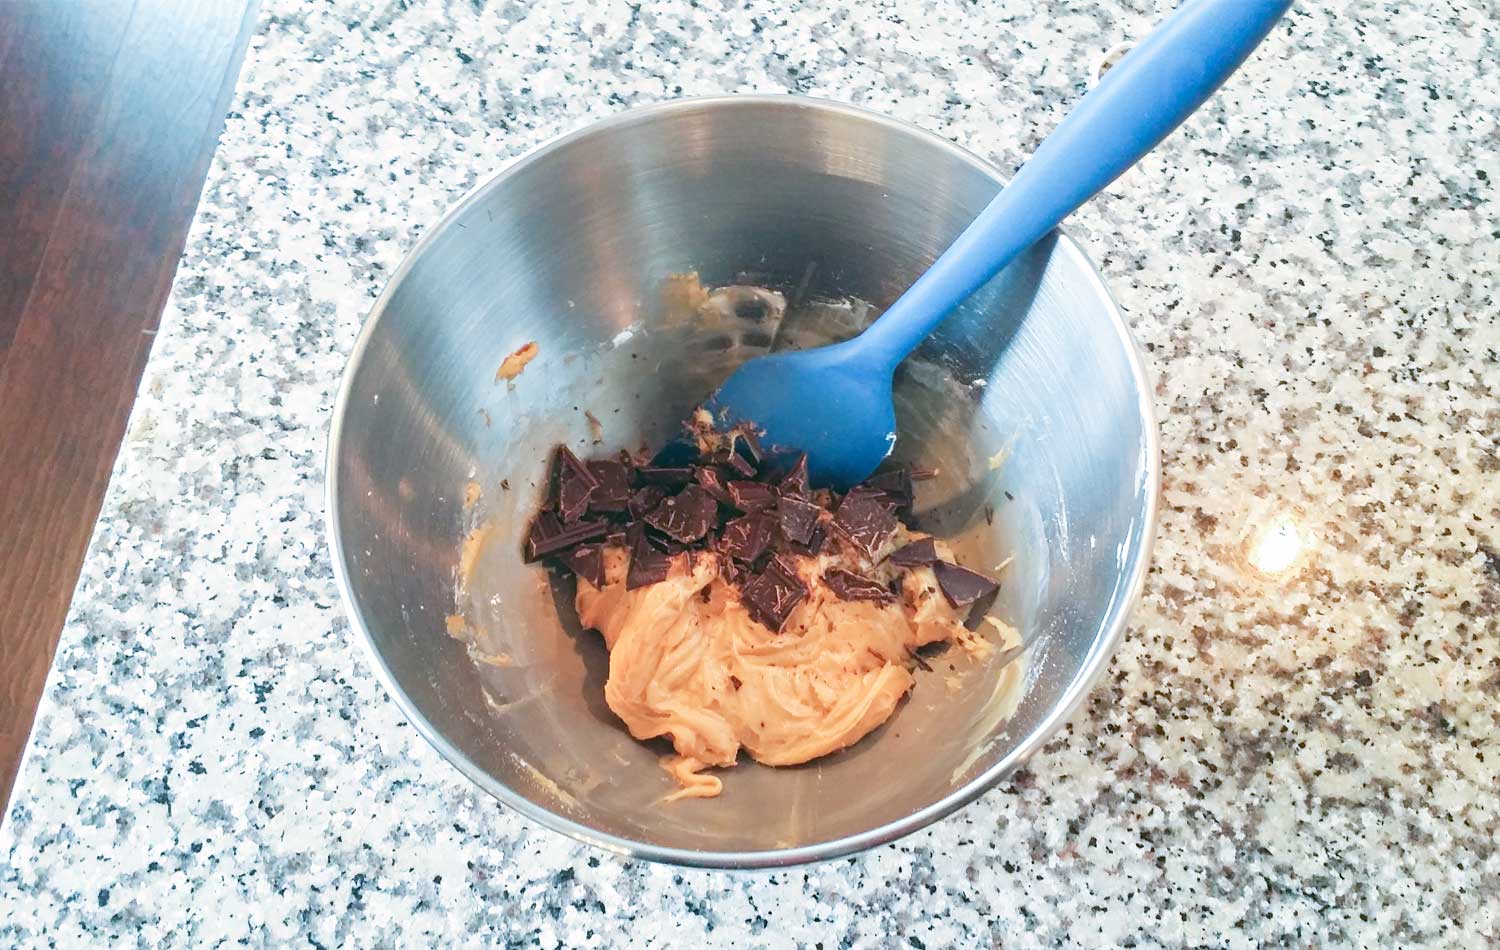 Add chopped pieces of chocolate to peanut butter mixture in bowl and stir with a spoon.